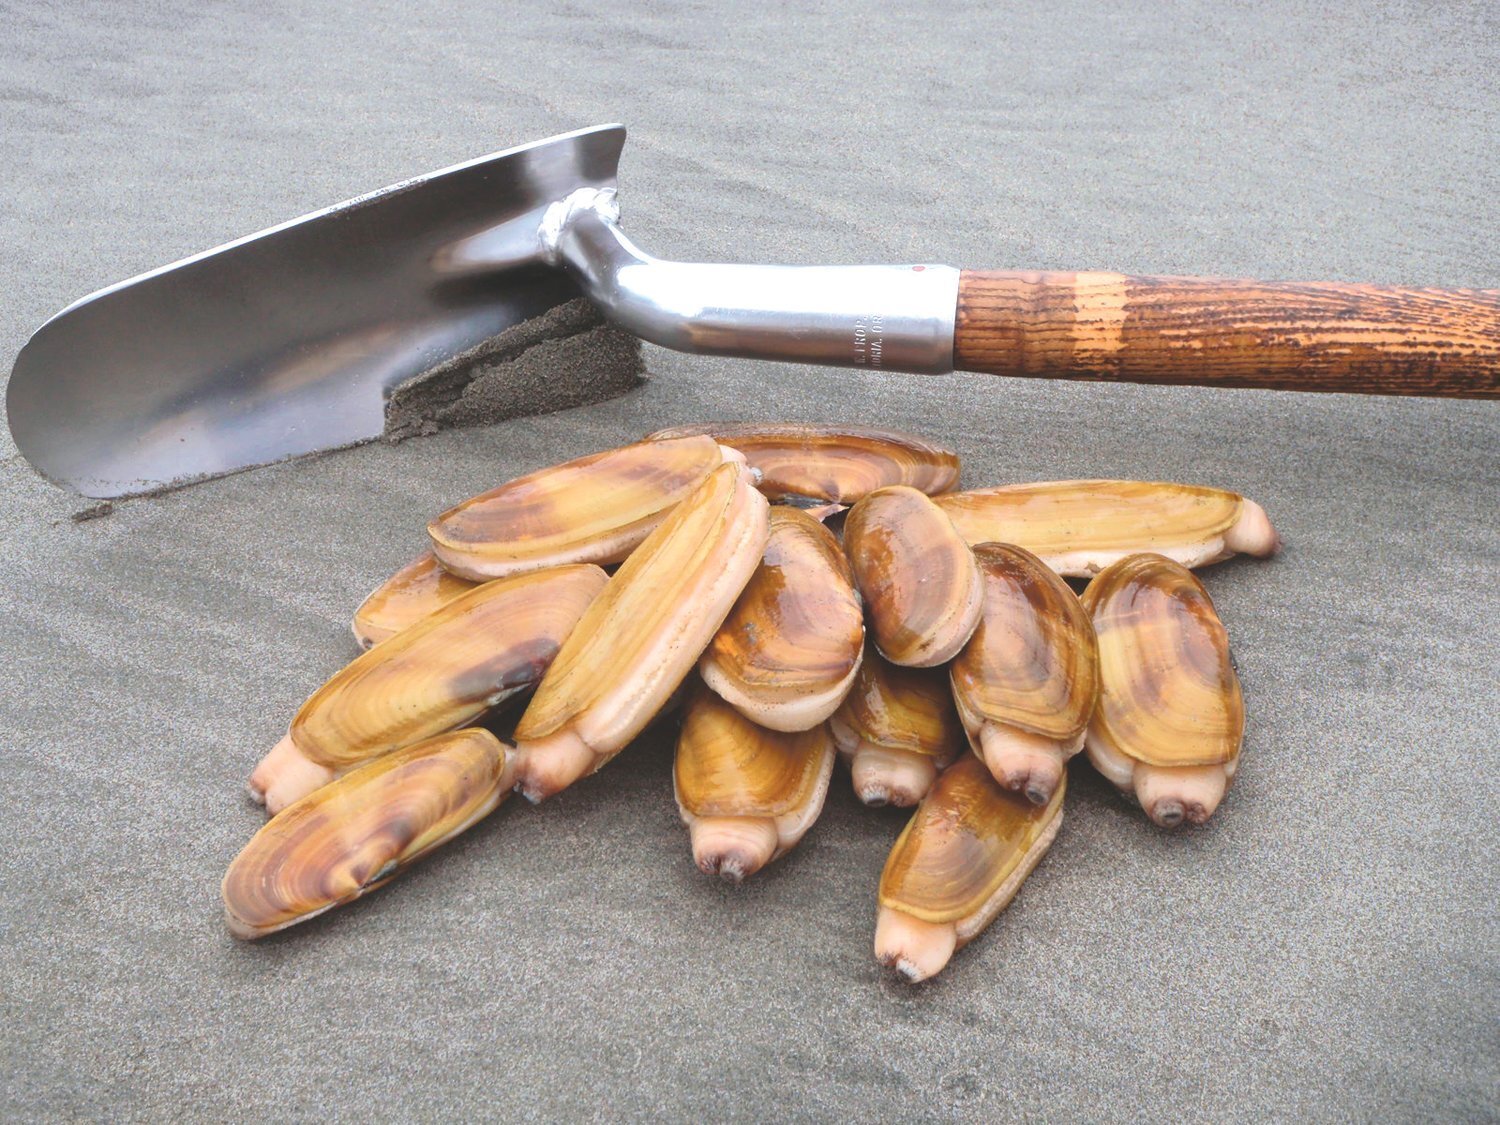 Washington Department of Fish and Wildlife (WDFW) shellfish managers on Wednesday confirmed coastal razor clam digging will reopen at Long Beach on Thursday, March 23, in addition to digs planned at Twin Harbors, Copalis and Mocrocks.